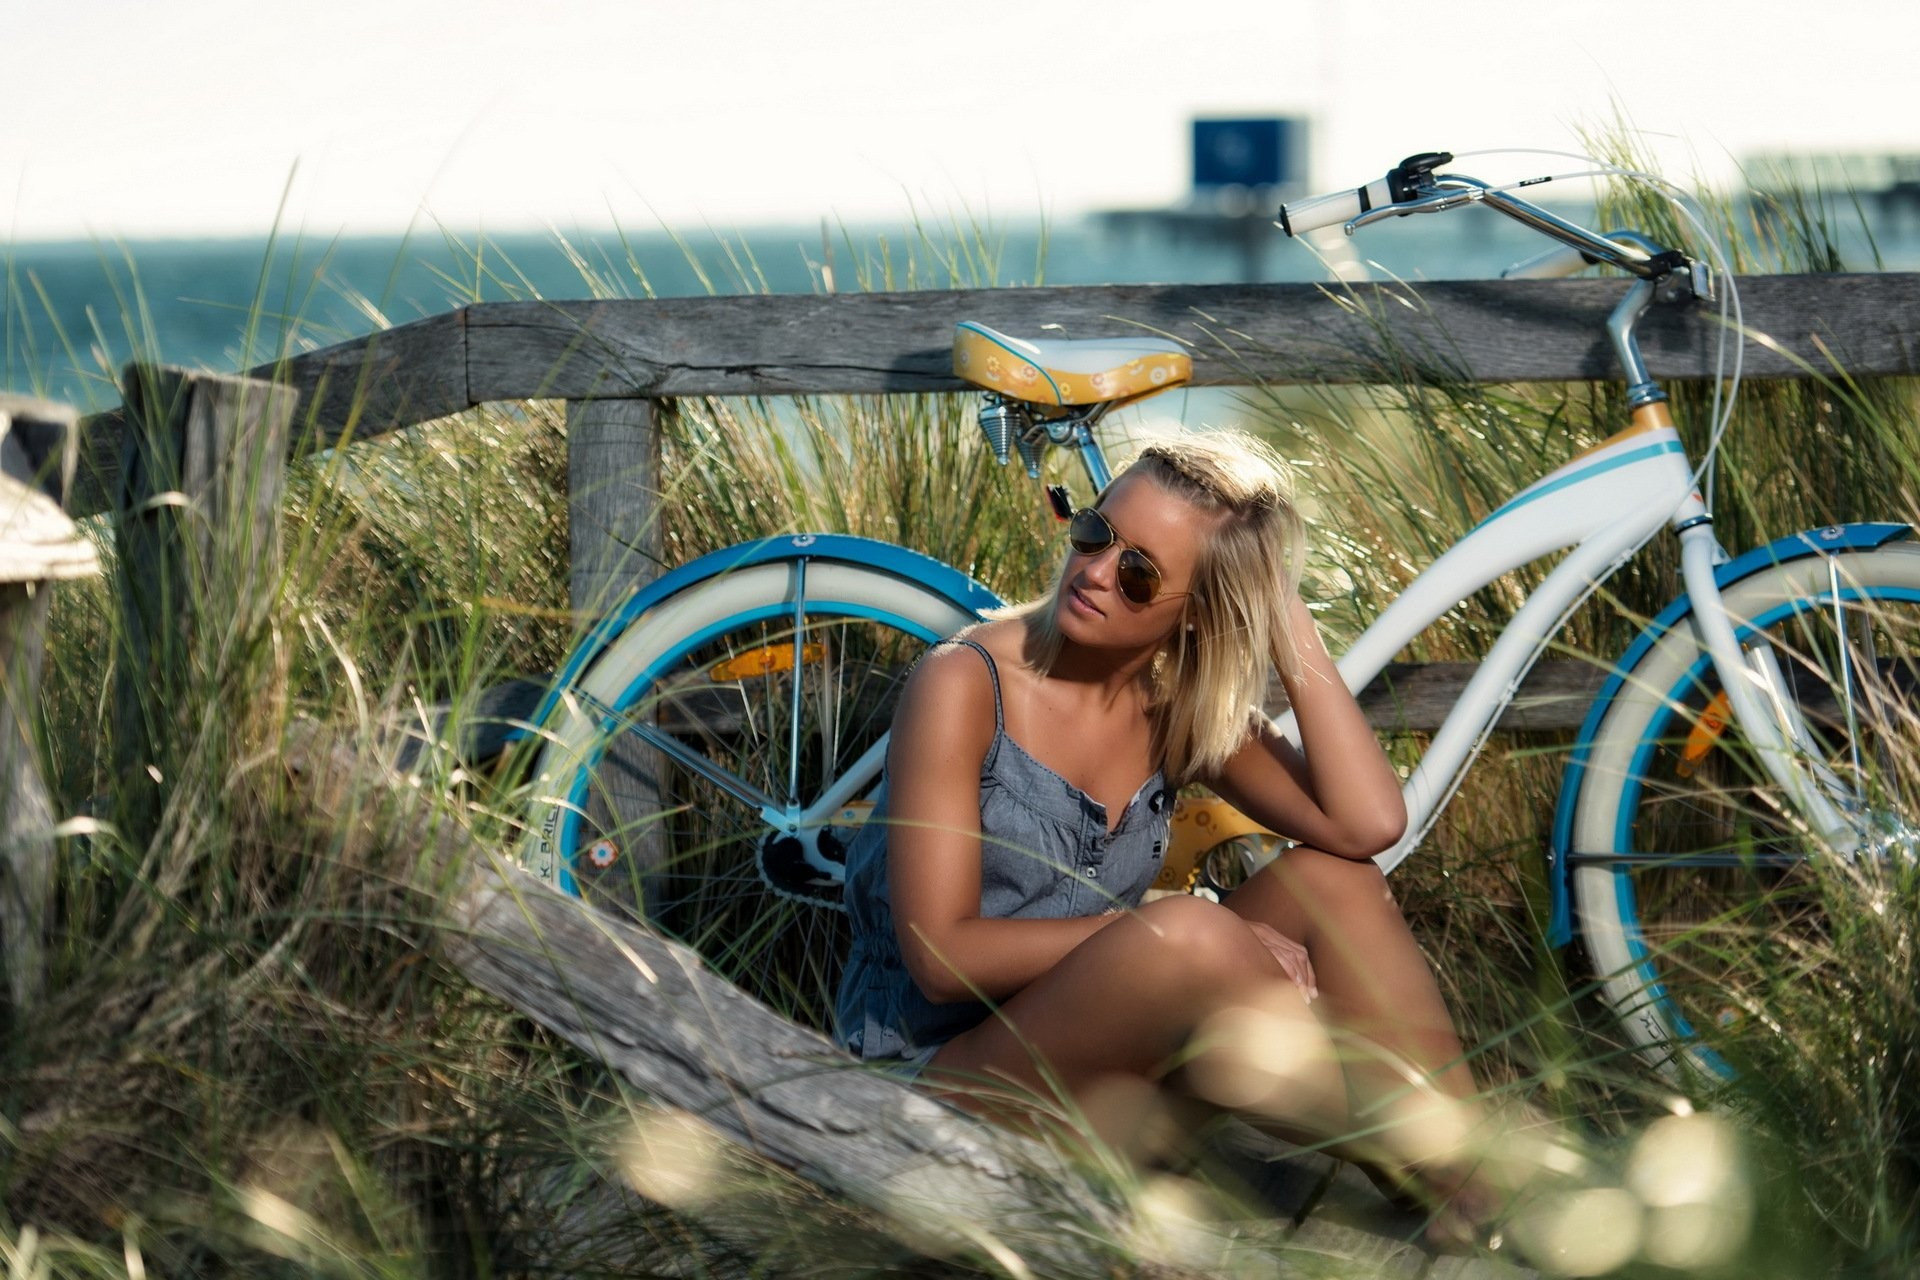 Free photo A girl relaxing in nature next to her bicycle